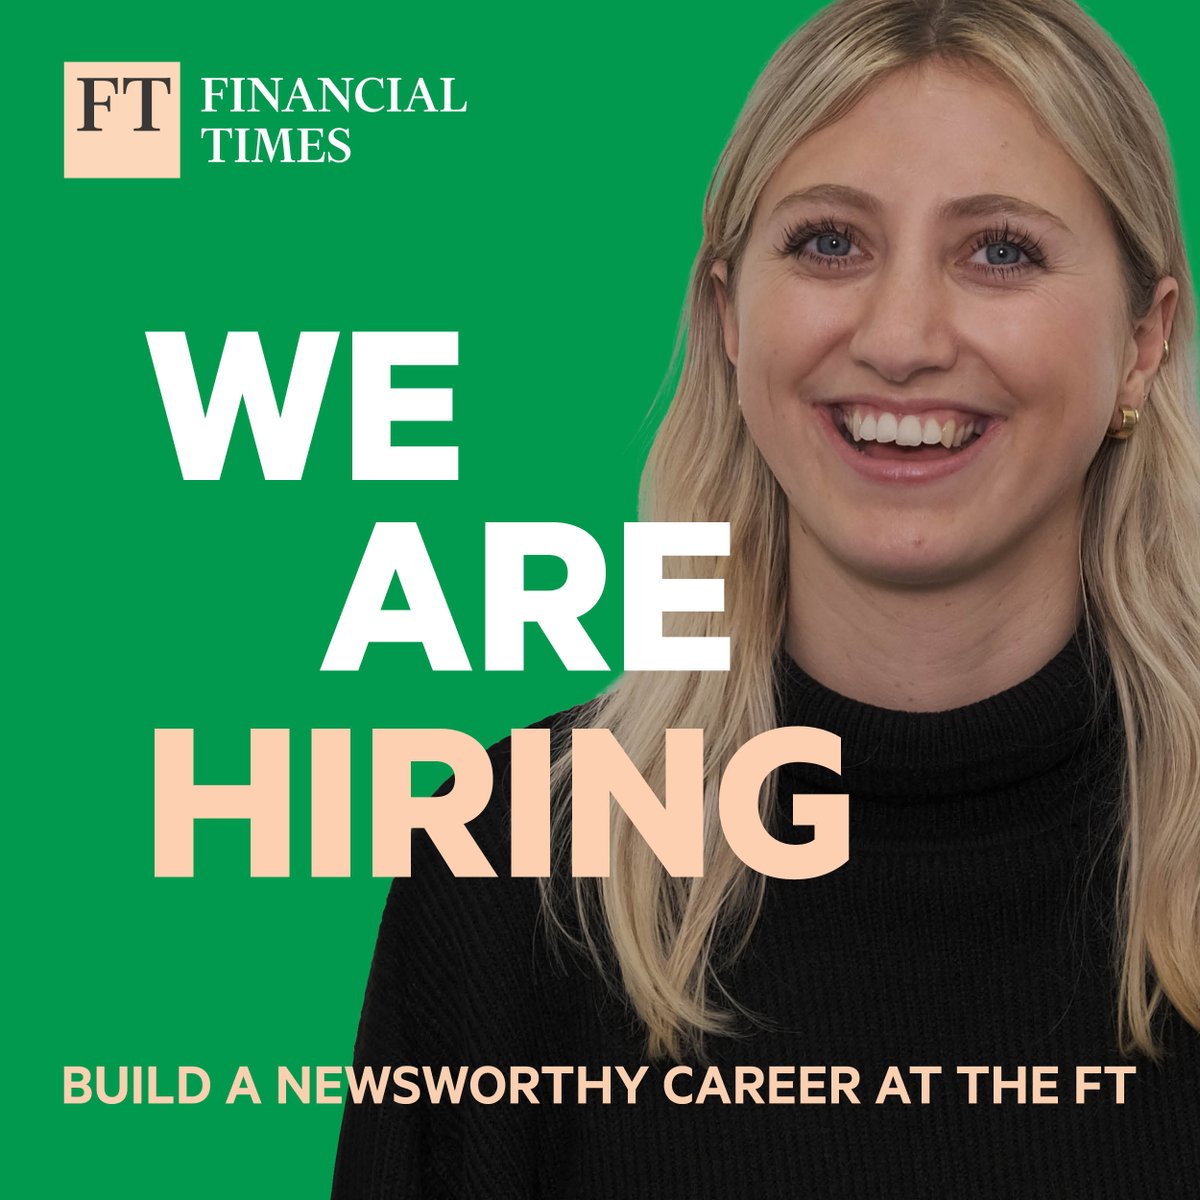 We are looking for a Creative Artworker to join our FT Specialist team in our London office. Check out all the details and apply here: boards.eu.greenhouse.io/financialtimes… #creativejobs #Jobs #artworker #jobsinlondon